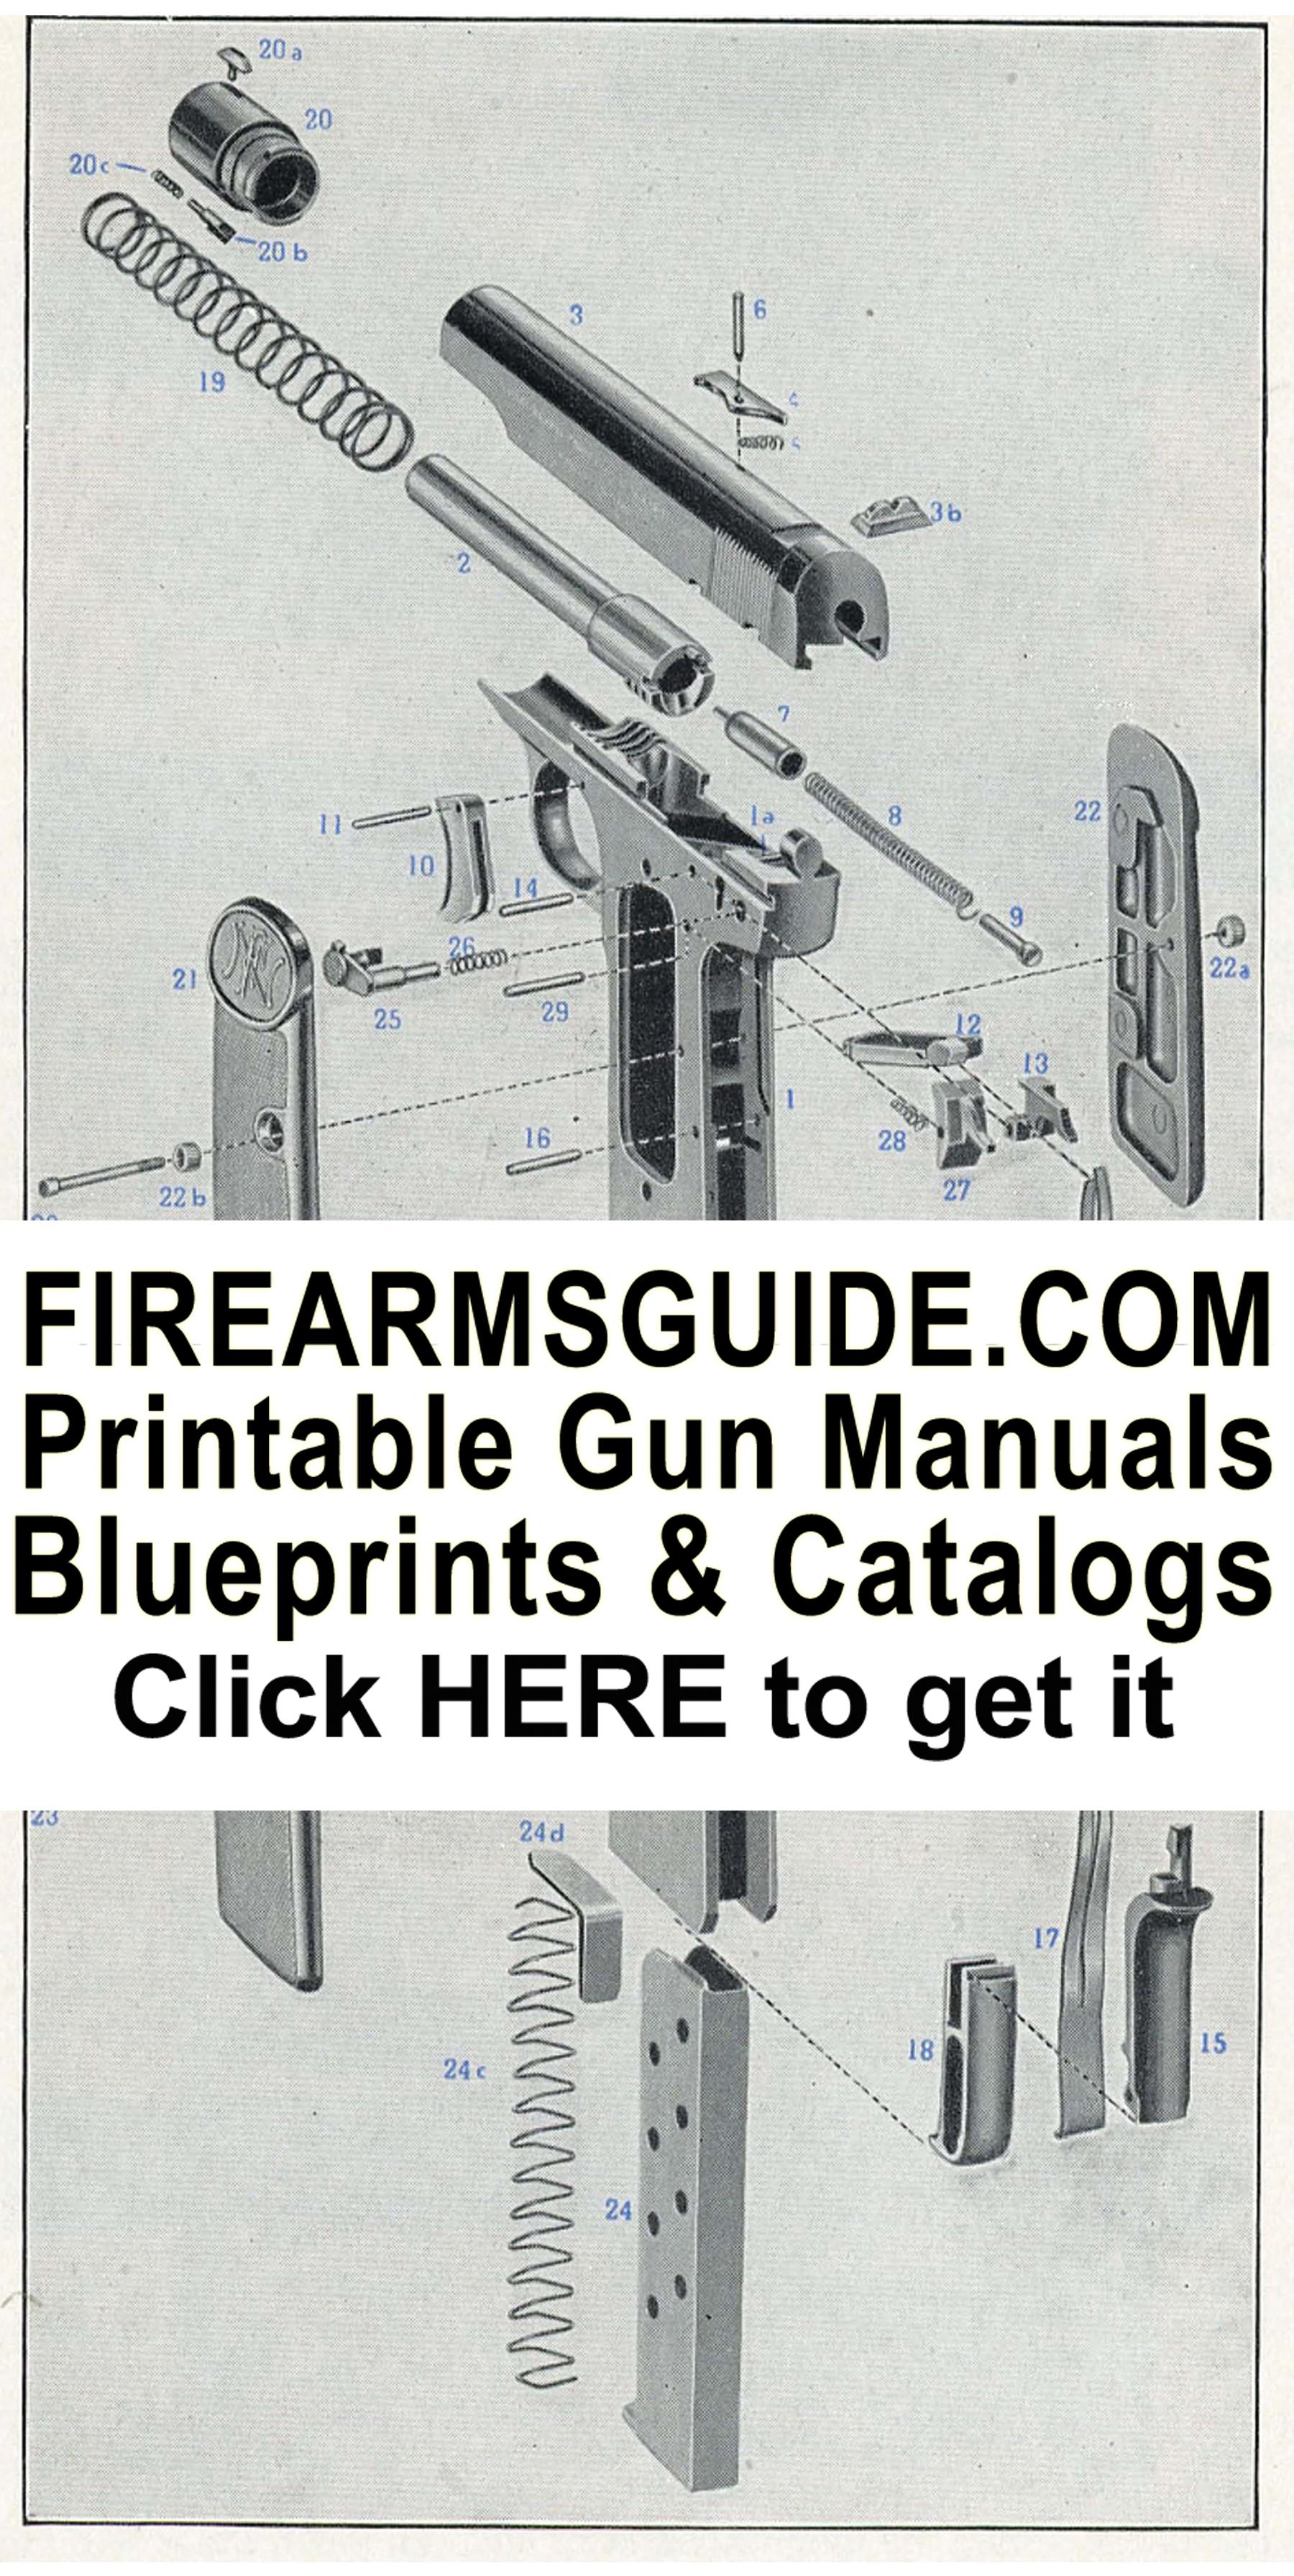 Frommer Stop Auto Exploded Gun Drawing Download – GunDigest Store